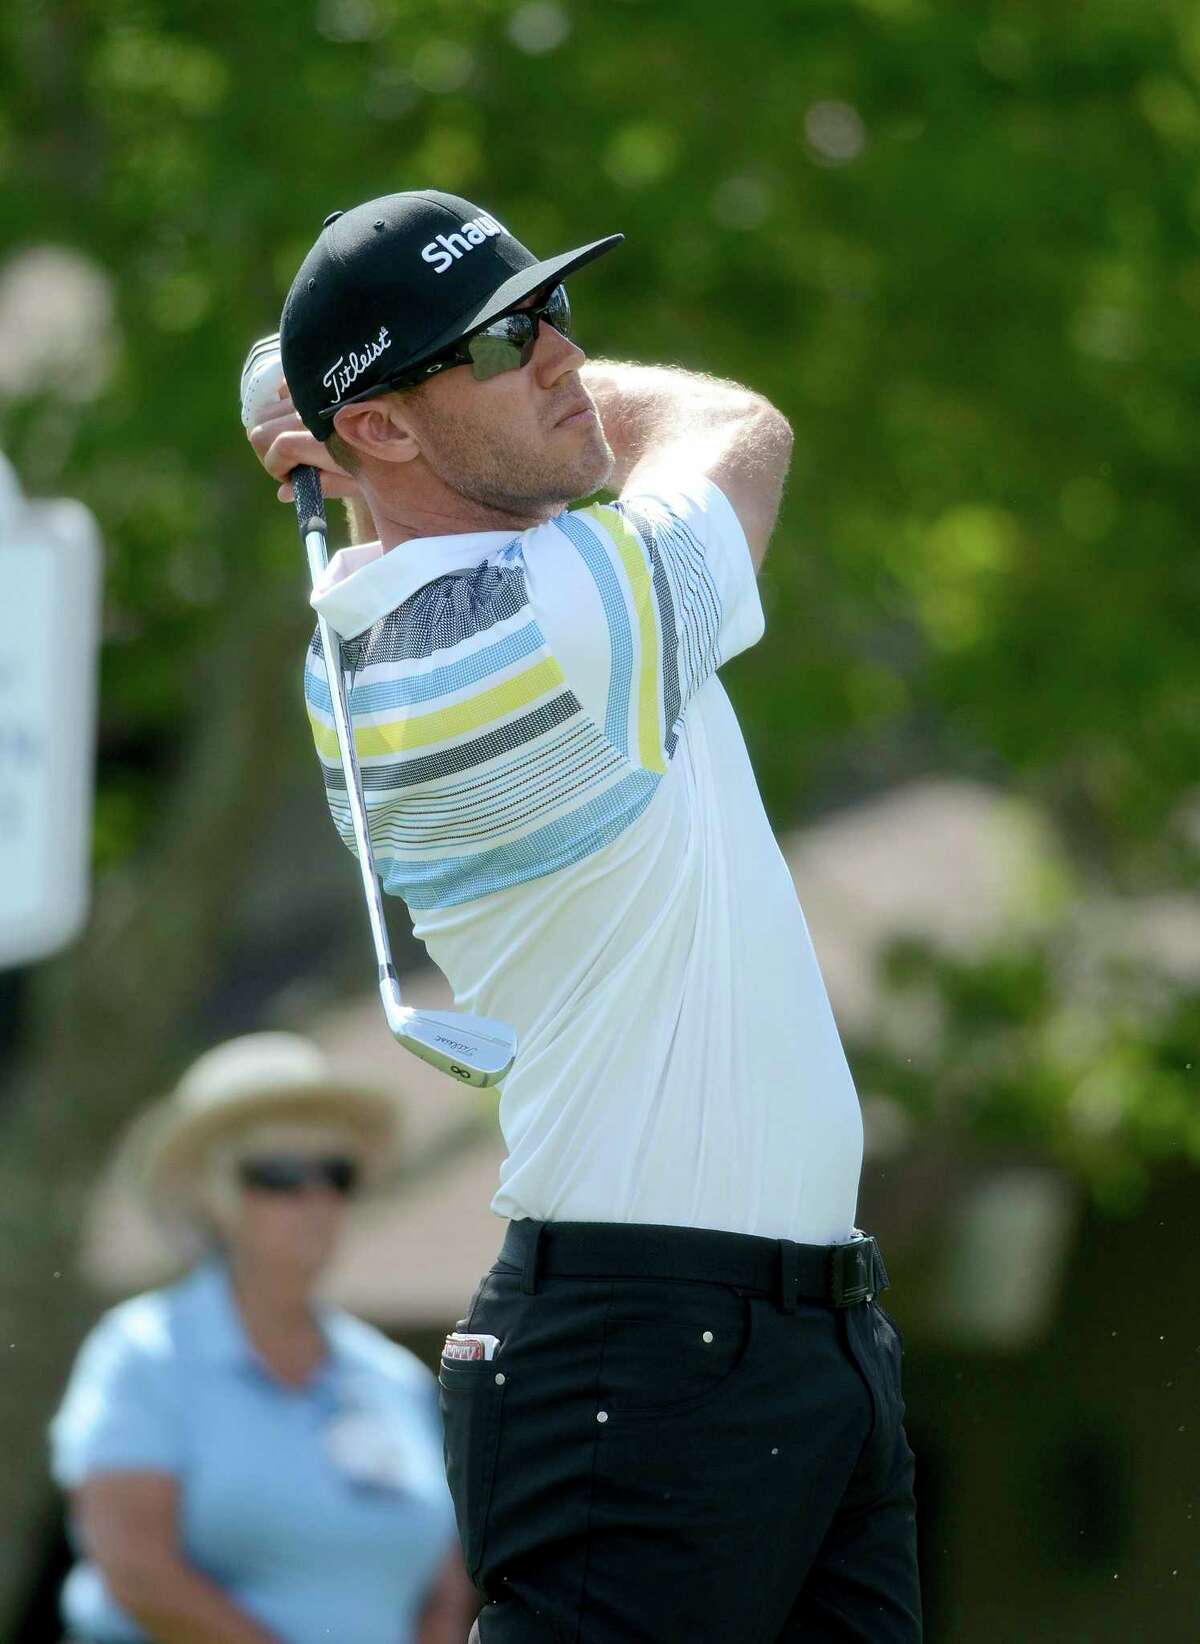 Graham DeLaet tees of on the 17th hole during the second round of the RBC Heritage golf tournament in Hilton Head Island, S.C., Friday, April 4, 2017. (Delayna Earley/The Island Packet via AP)